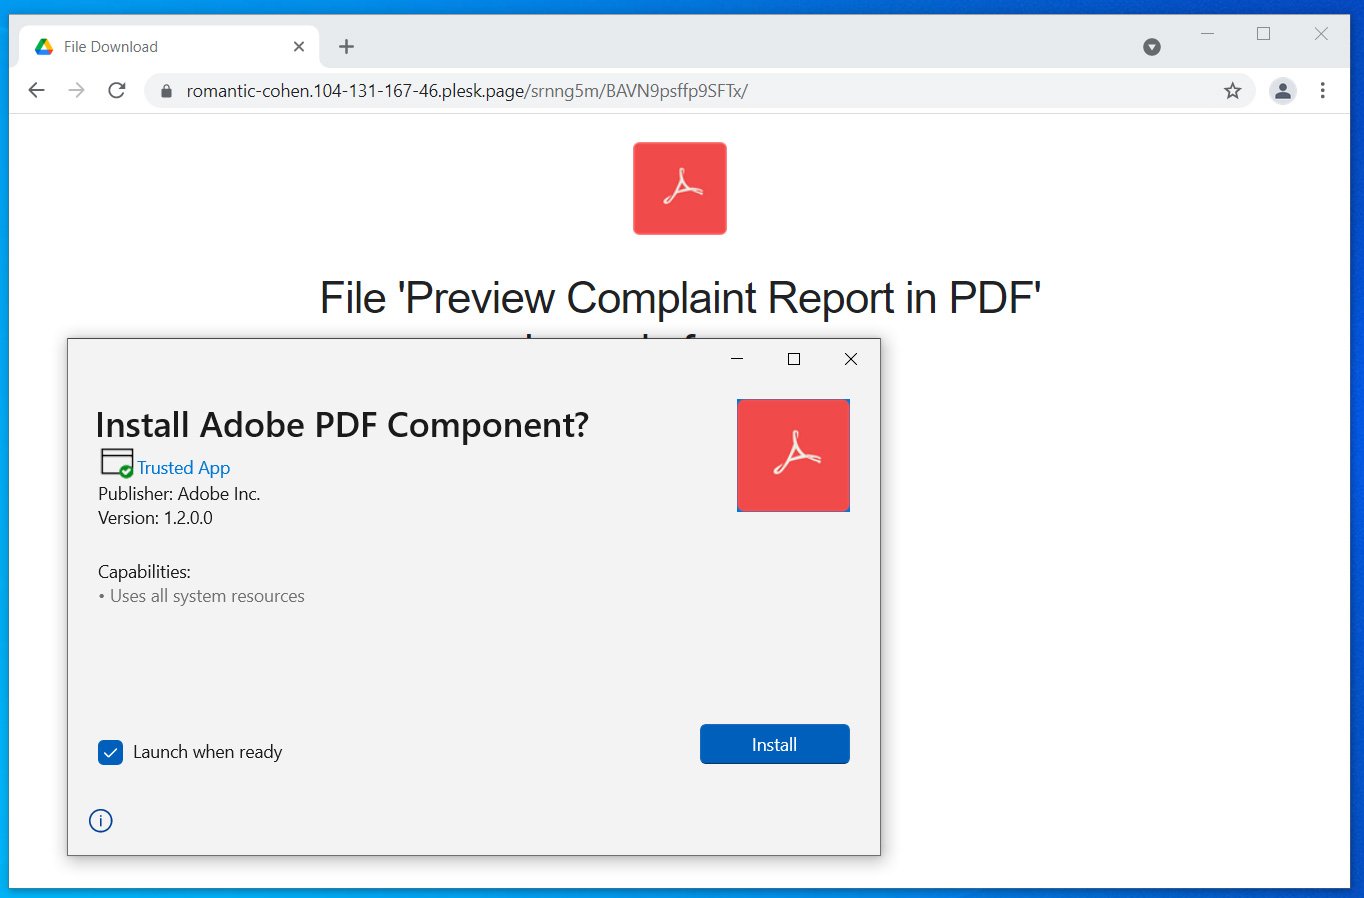 App Installer prompting to install fake Adobe PDF component